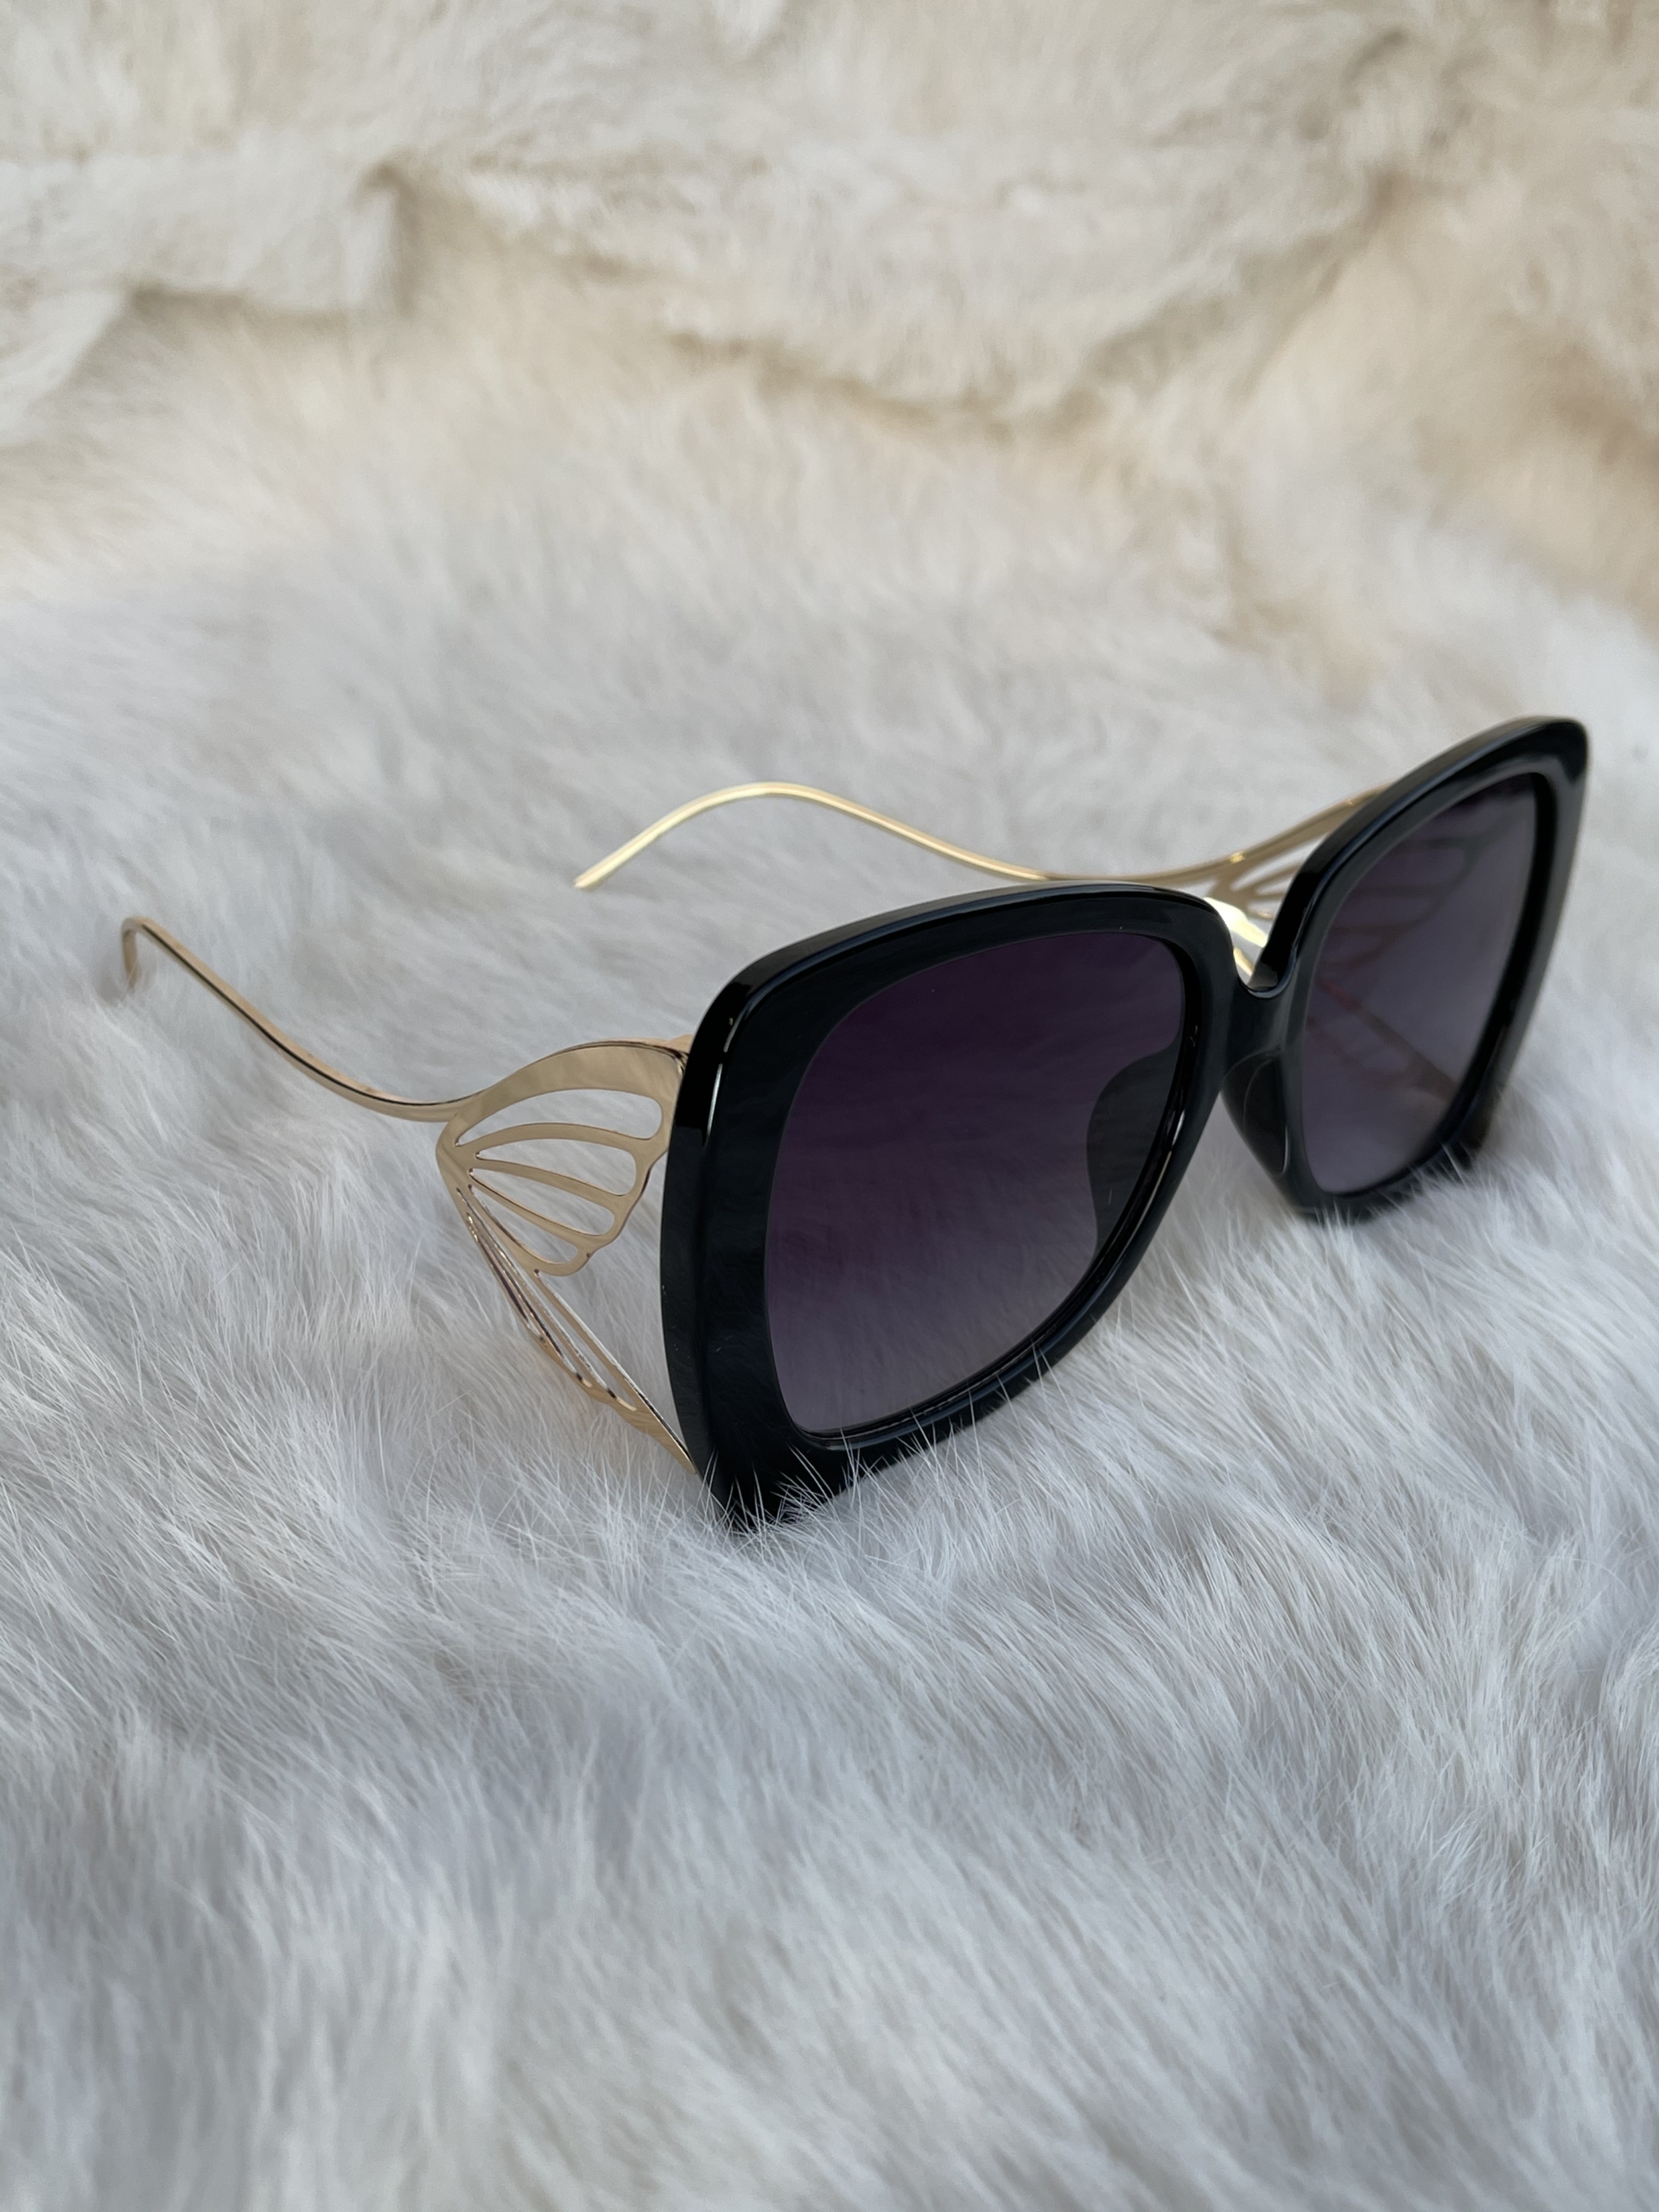 The Retro Butterfly Sunglasses – Tallulah Lee